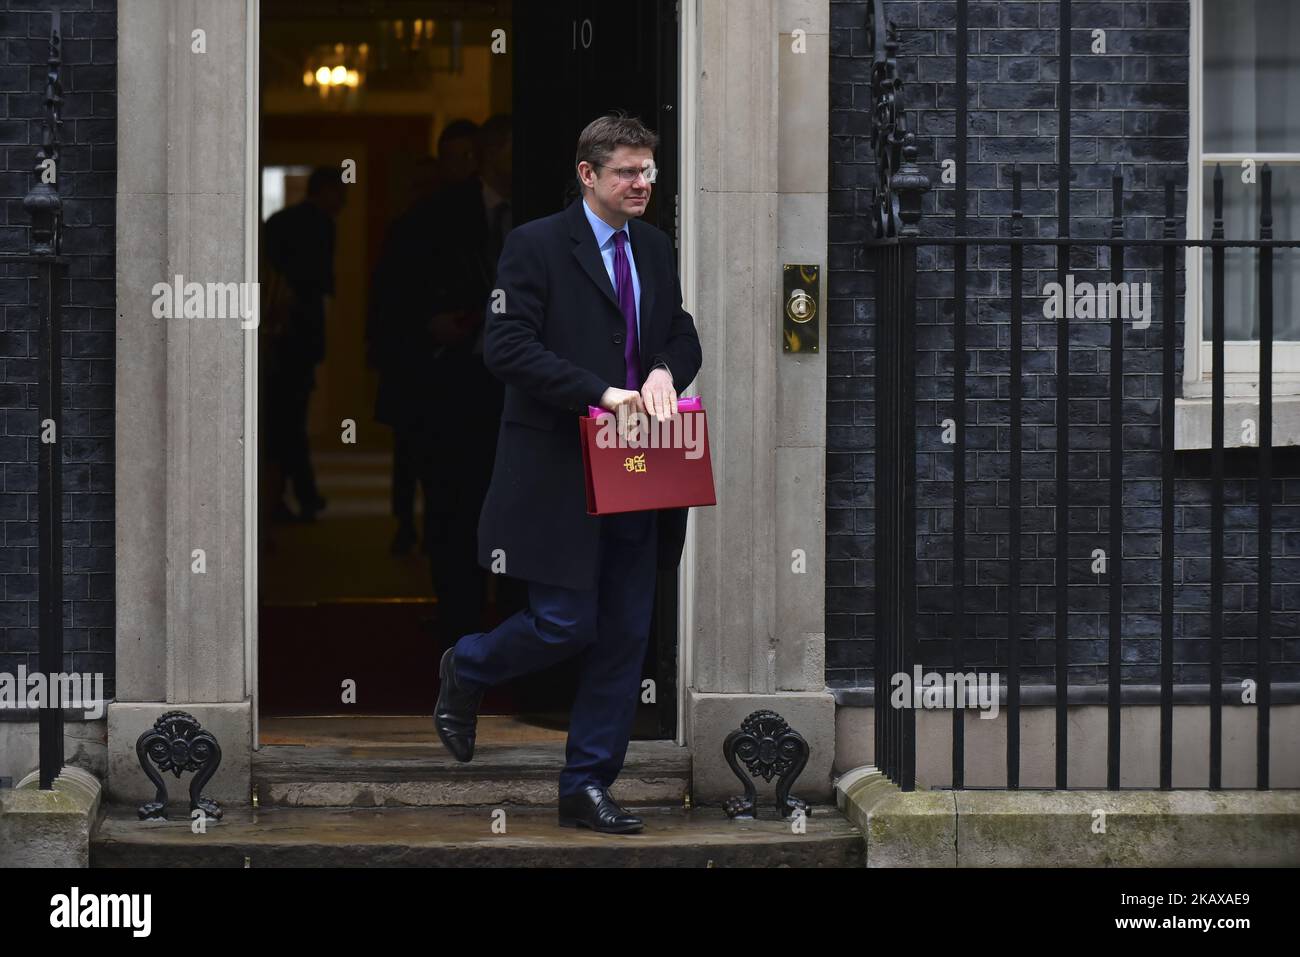 Secretary of State for Business, Energy and Industrial Strategy Greg Clark leaves 10 Downing Street after attending the weekly Cabinet Meeting, London on March 27, 2018. Prime Minister Theresa May is facing another Brexit hurdle after the opposition Labour Party announced its pushing for a legal commitment to avoid a hard border with Ireland after Britain leaves the European Union. The Migration Advisory Committee (MAC) said businesses are concerned about their ability to recruit workers from the EU after Britain leaves the EU. UK employers also see EU workers as 'more reliable' and eager than Stock Photo